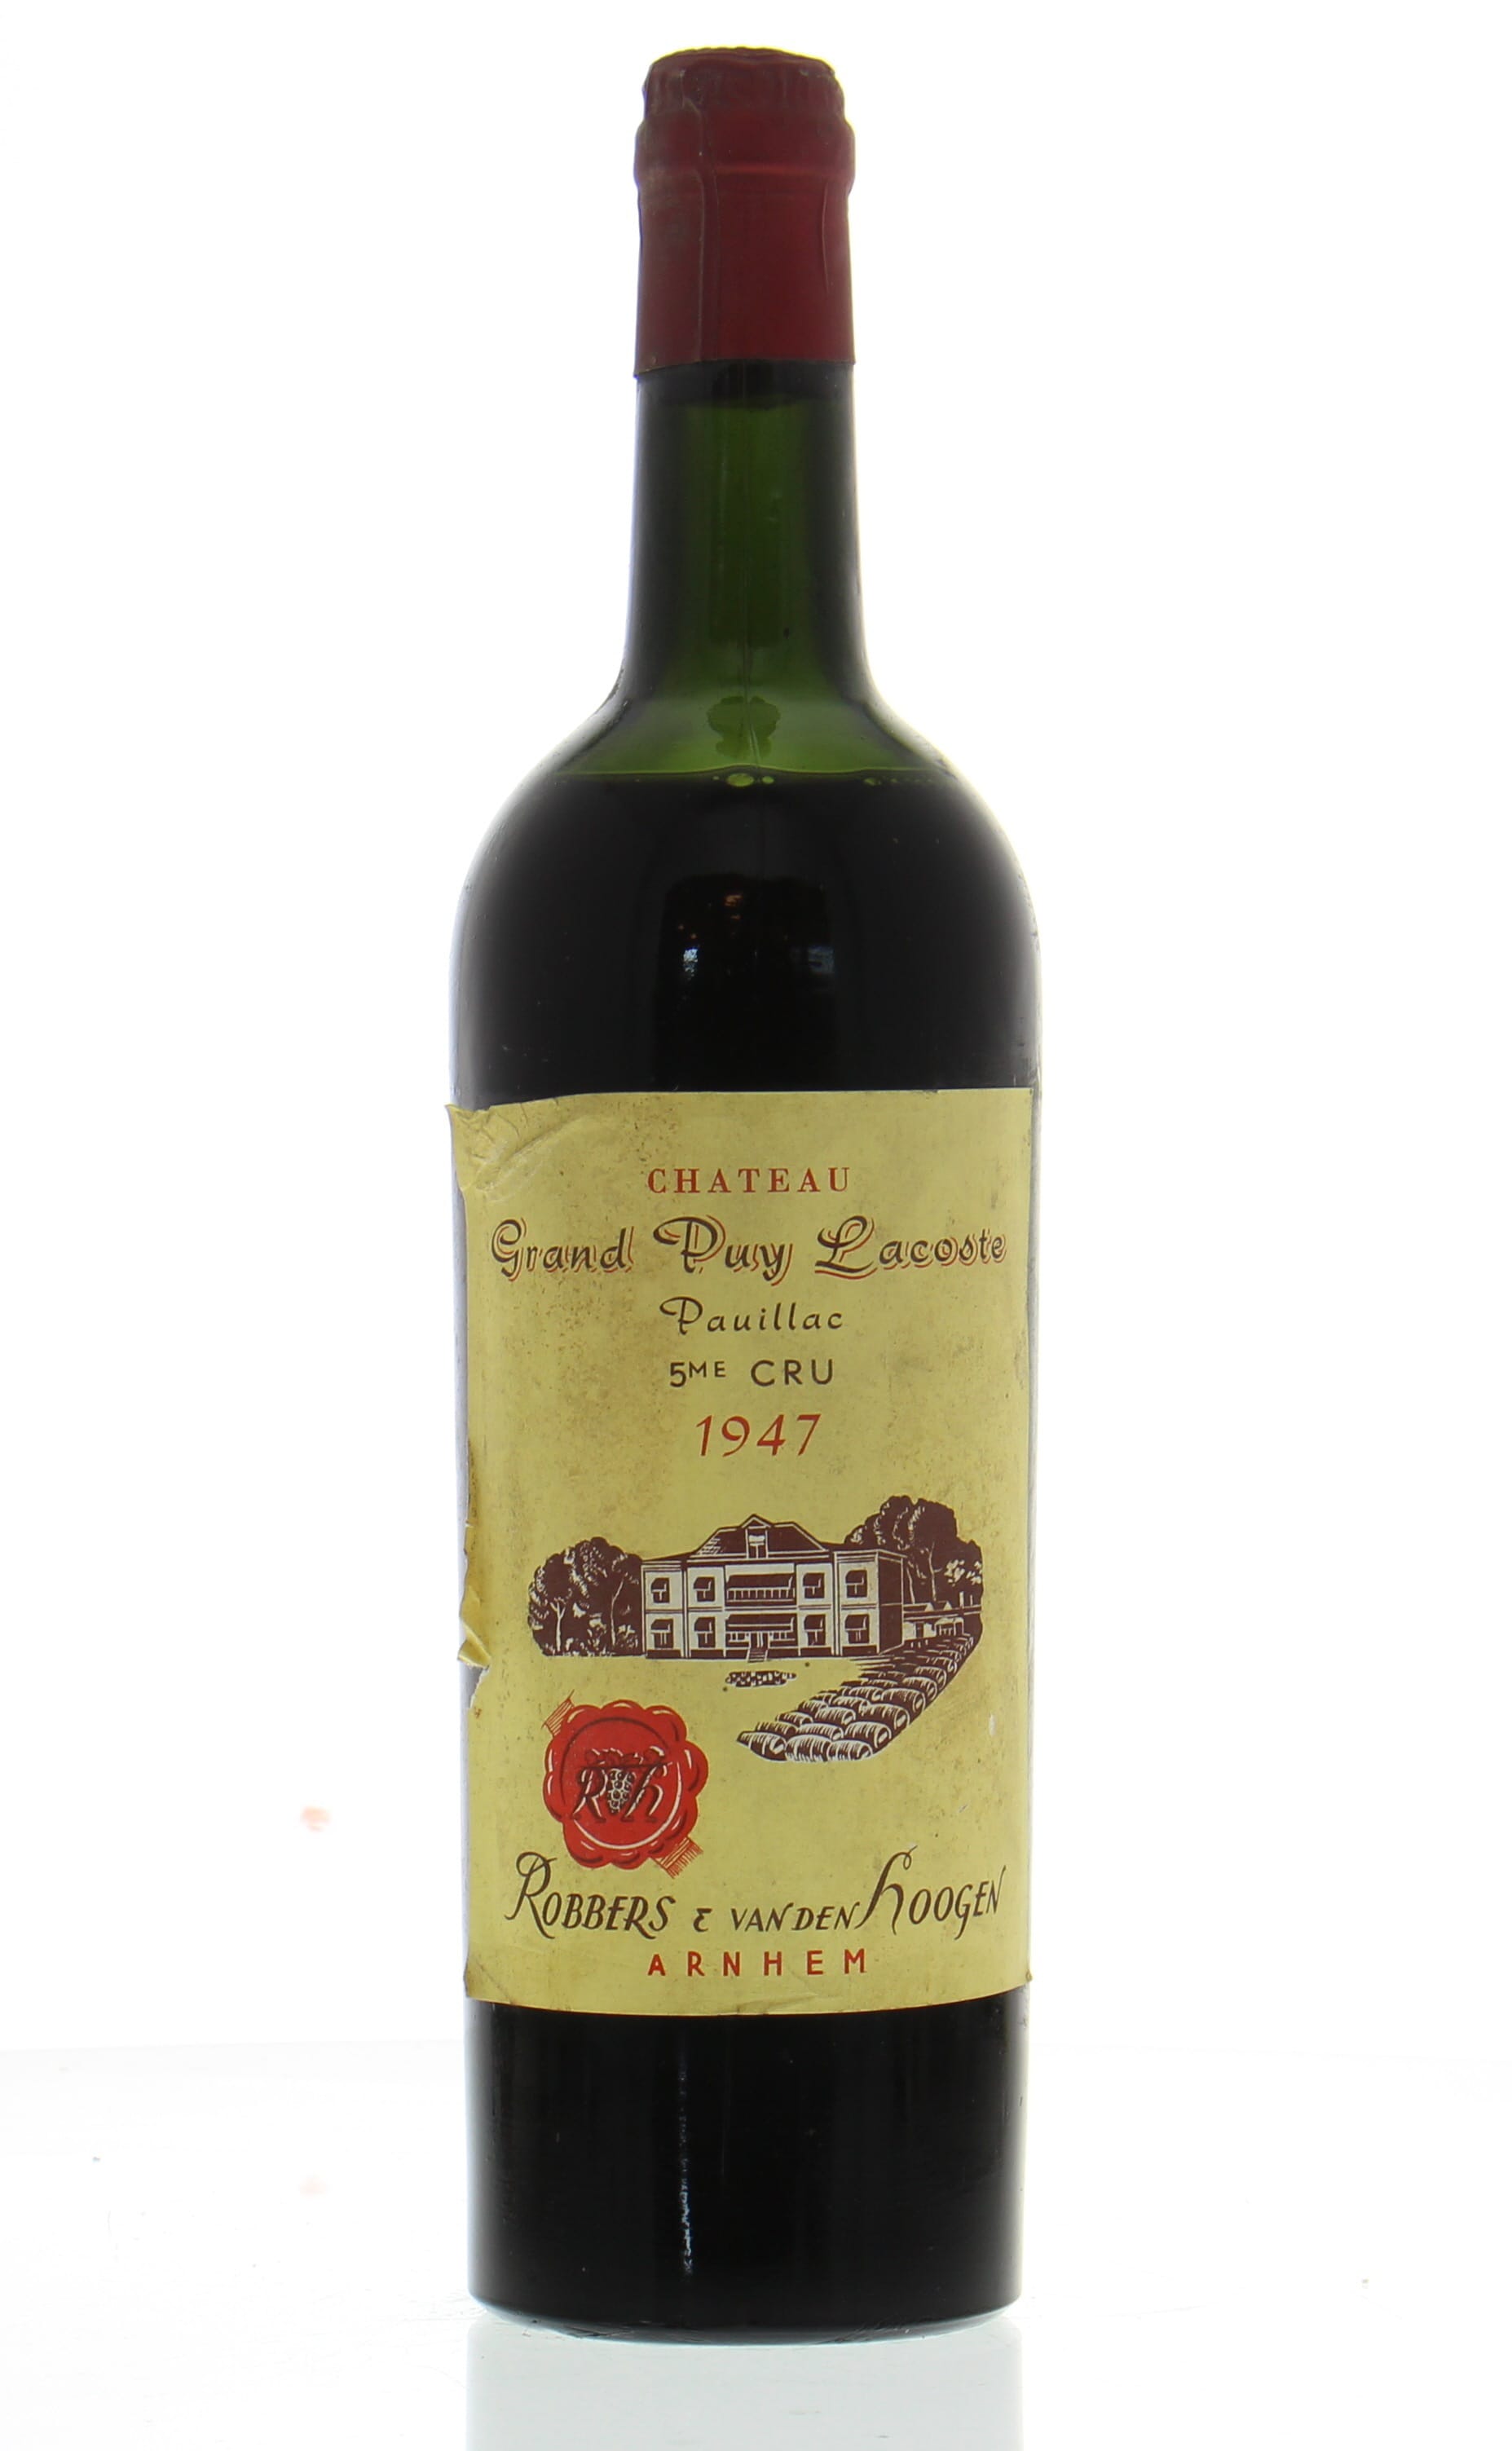 Chateau Grand Puy Lacoste - Chateau Grand Puy Lacoste 1947 High shoulder